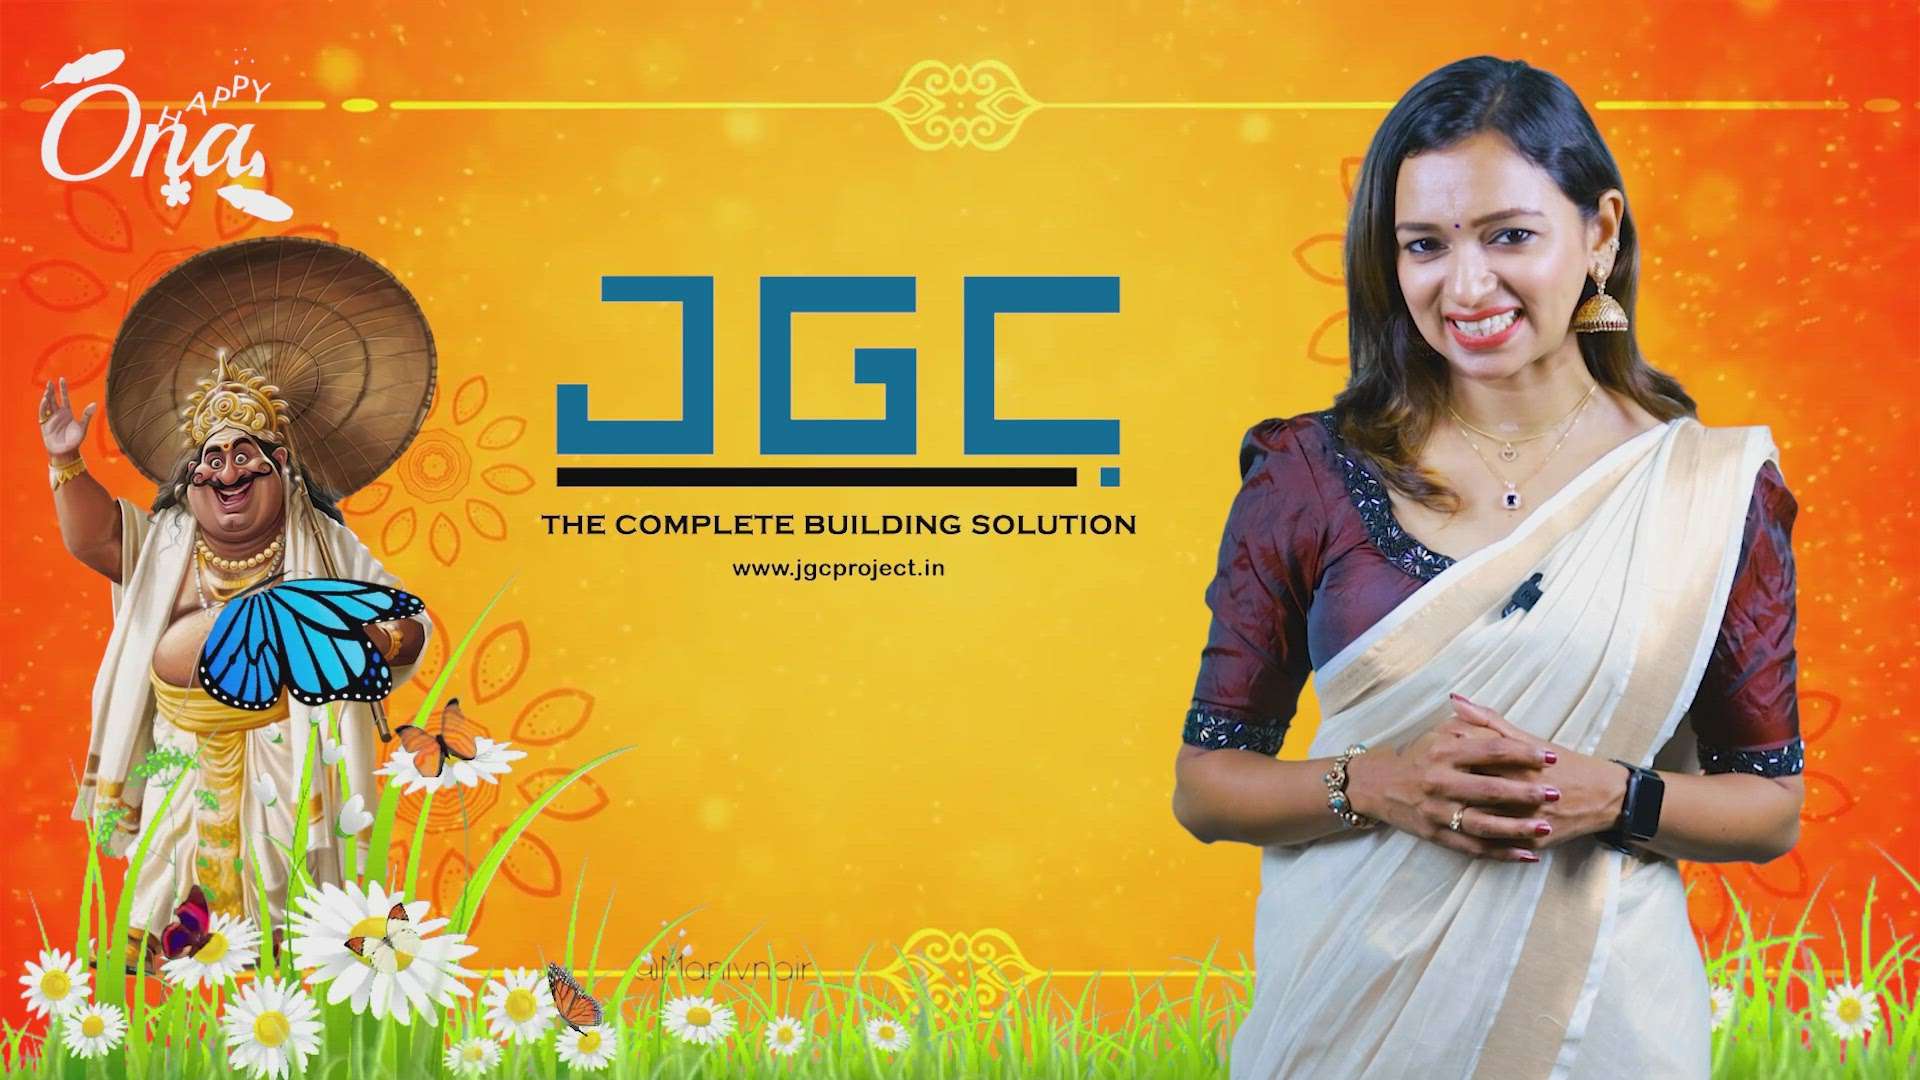 JGC The Complete Building Solution
Kuravilangad, Vaikom road near Bosco Junction
📞8281434626
📧jgcindiaprojects@gmail.com
Building design
Consluting
Renovation
Interior design
 #FloorPlans #WestFacingPlan  #groundfloorplan #KeralaStyleHouse  #keralastyle #keralahomeplans  #keralaarchitectures  #Contractor  #HouseConstruction  #keralahomedesignz  #keralabuilders #3dxmax  #Revit2020  #ContemporaryHouse  #ProposedColonialStyle ##instagrammers #igers #instalove #instamood #instagood #followme #follow #comment #shoutout #iphoneography #androidography #filter #filters #hipster #contests #photo #instadaily #igaddict #envywear #PleaseForgiveMe #photooftheday #pics #insta #picoftheday #bestoftheday #instadaily #instafamous #popularpic #popularphoto